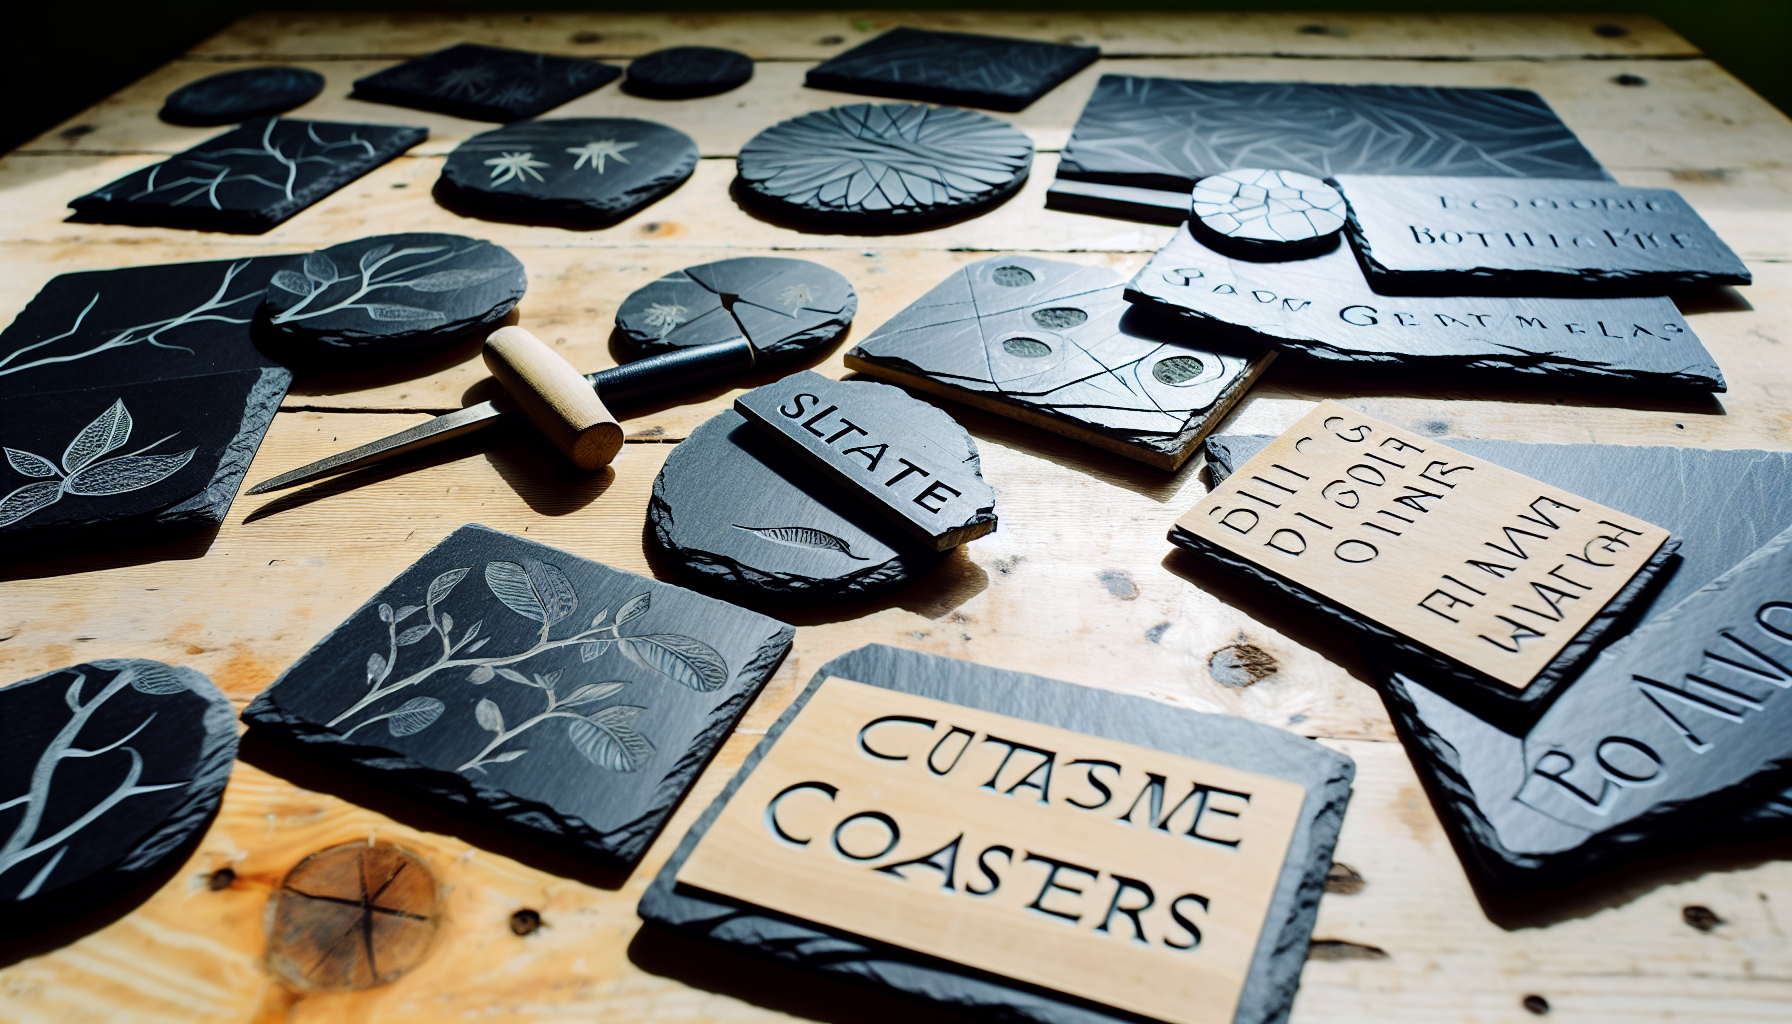 Artistic creations made from slate